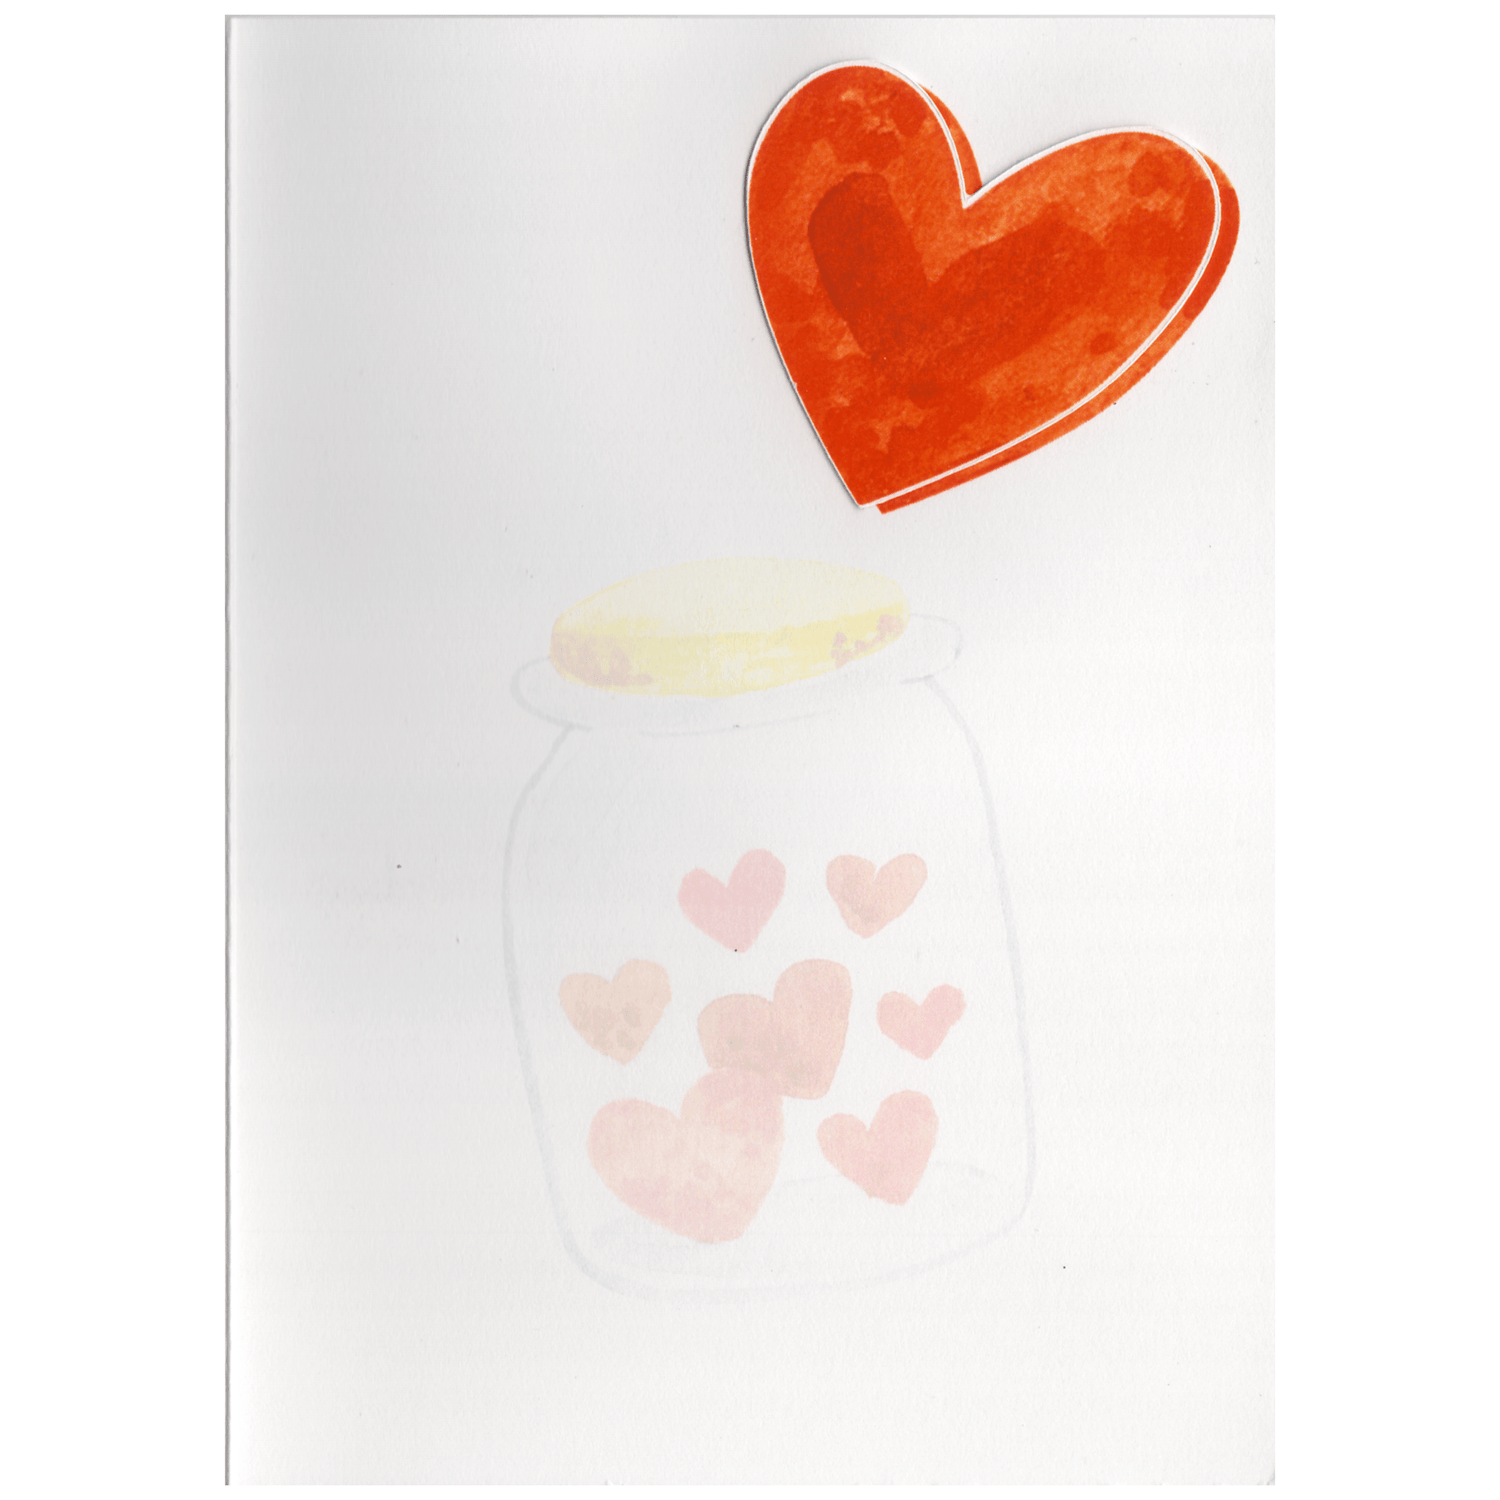 There is a ghosted image of the jar with hearts and in the top right a raised red heart that sits neatly in line with the top of the card when closed.